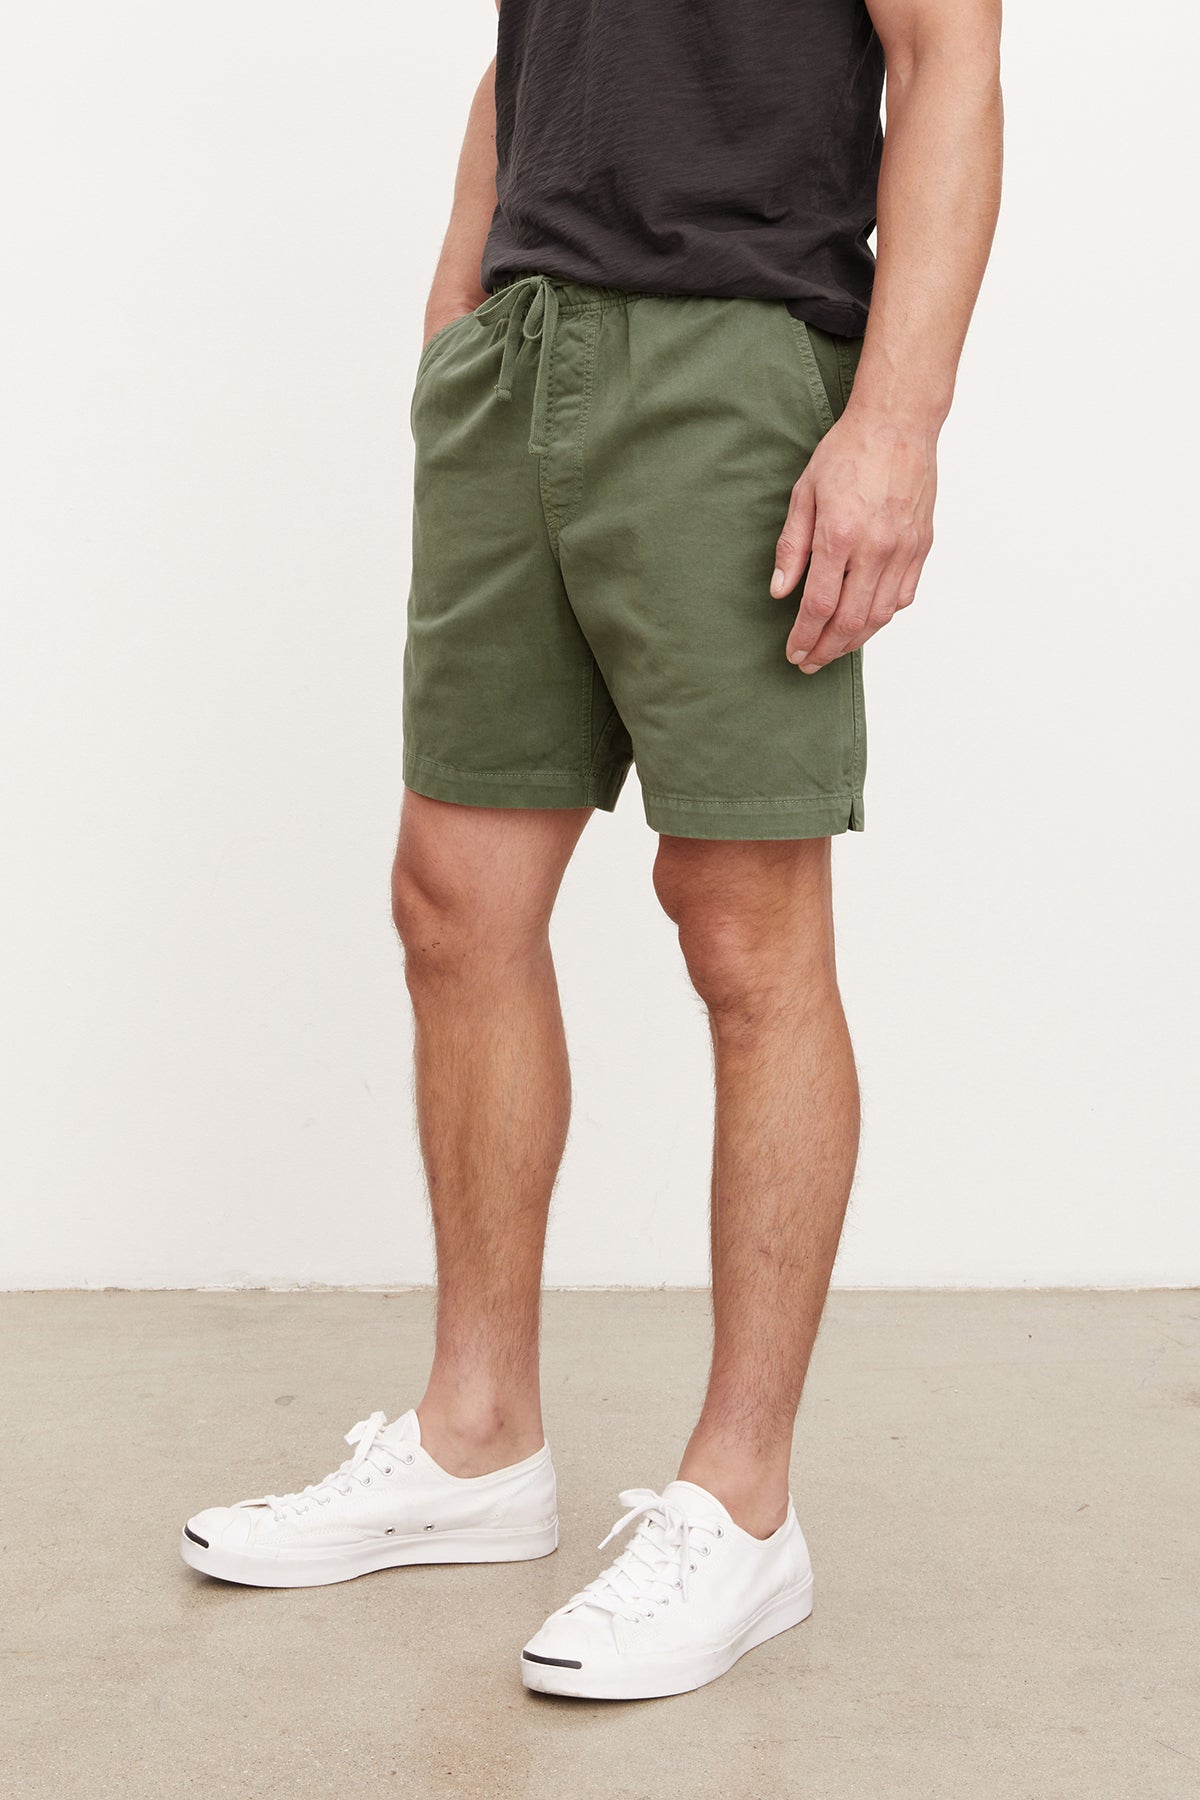   Man standing in a neutral pose wearing Velvet by Graham & Spencer's FIELDER SHORT, an olive green cotton twill shorts with an elastic drawstring waist, a black t-shirt, and white sneakers against a plain background. 